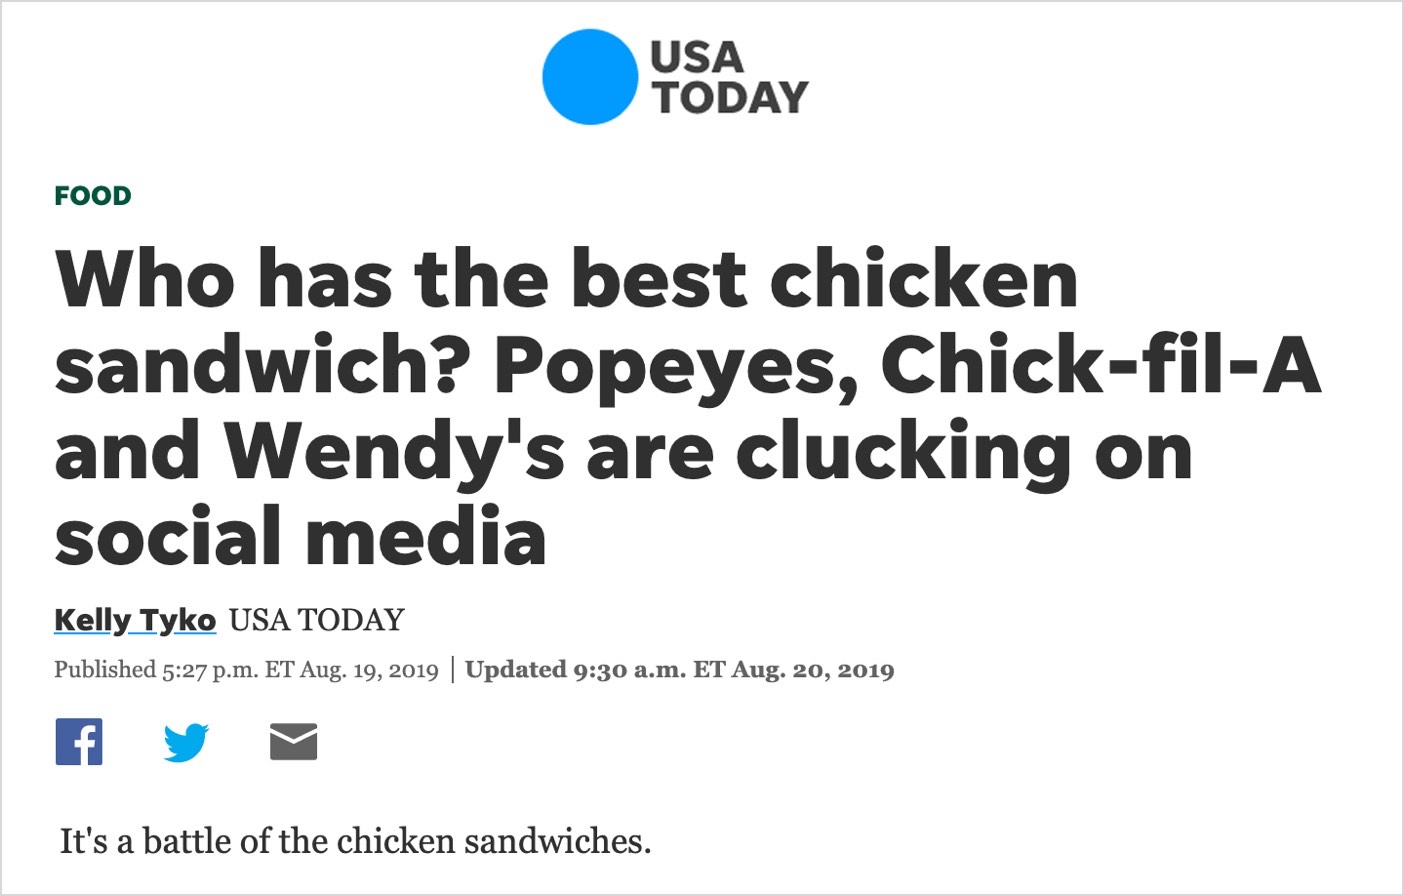 Screen shot of a USA Today article - "Who has the best chicken sandwich? Popeyes, Chik-fil-A, and Wendy's are clucking on social media."